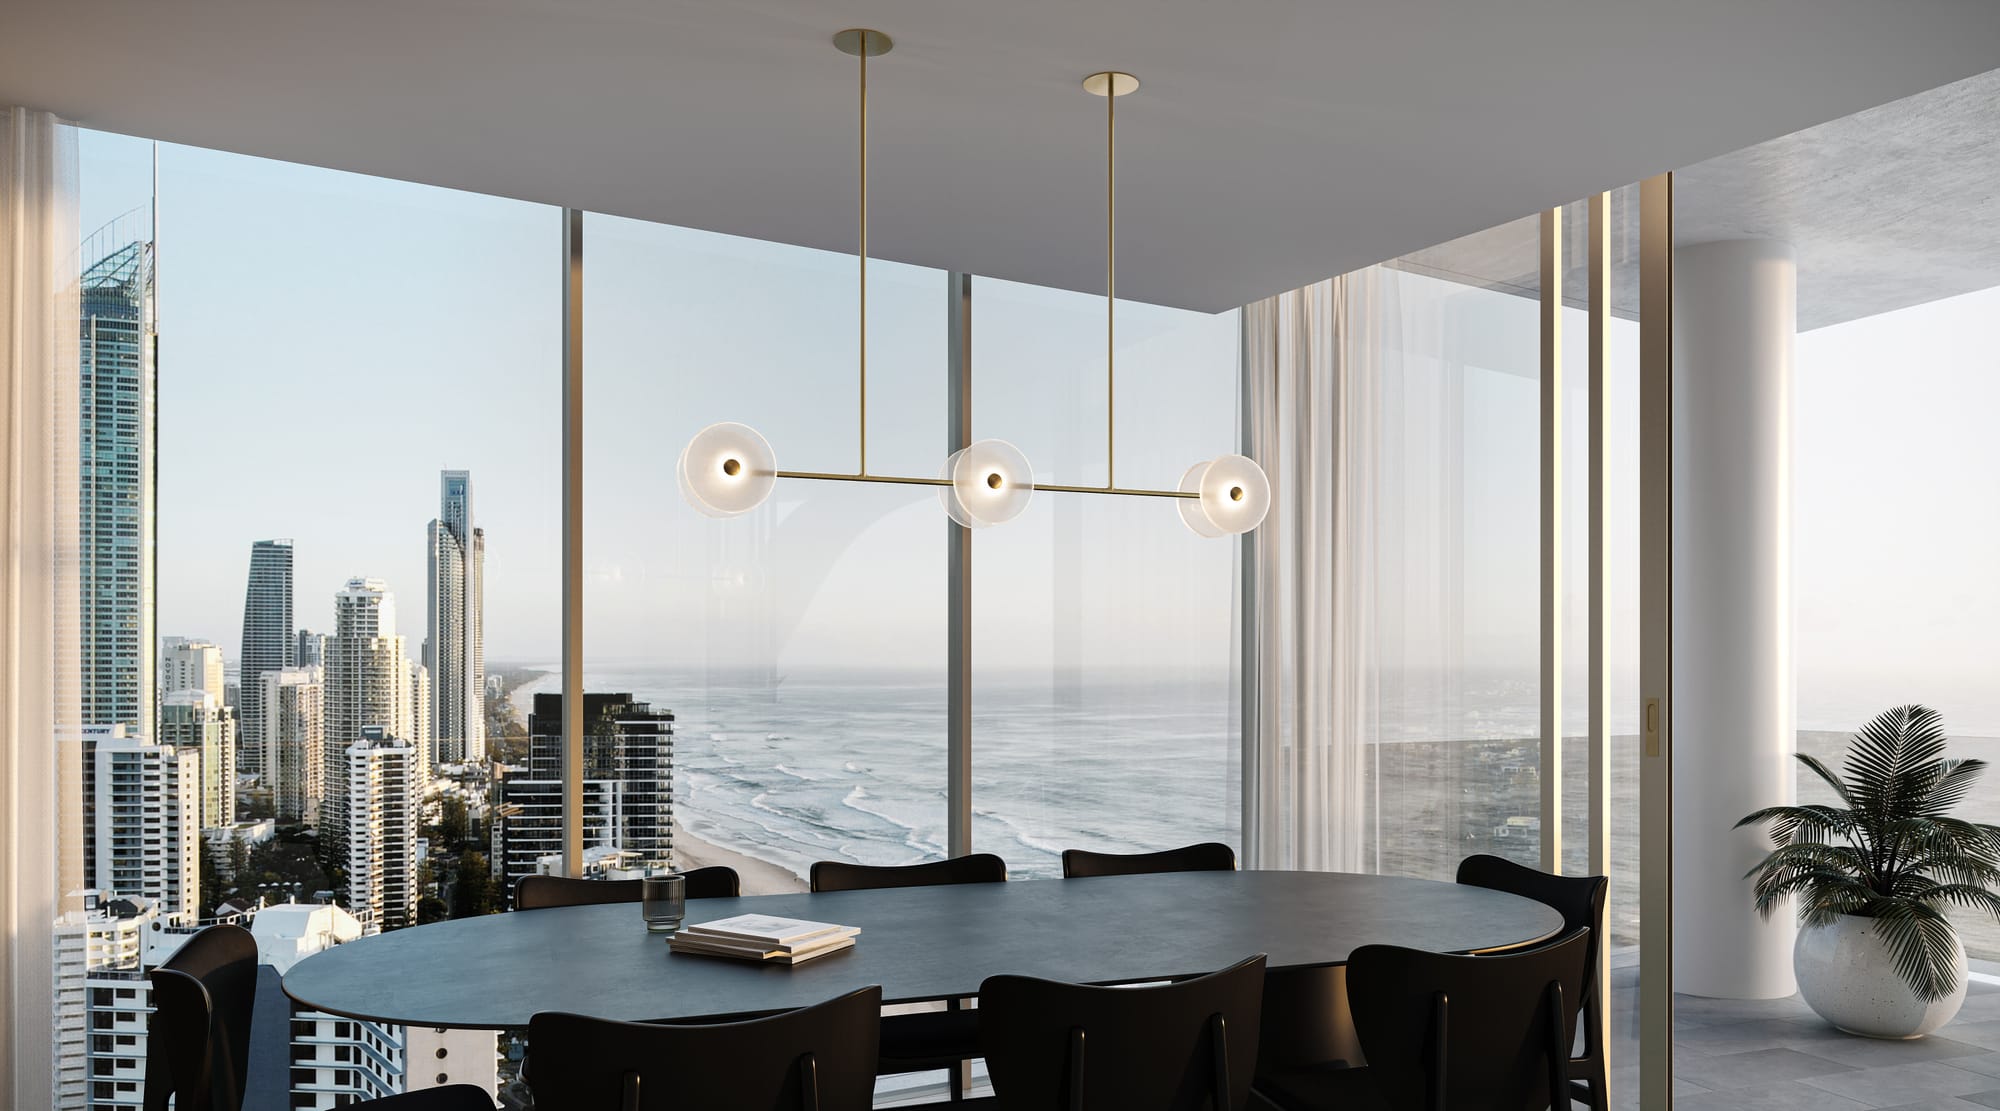 Coral Linear Rod 6 Pendant Light by SOKTAS. Copyright of SOKTAS. Gold and glass pendant light hanging above dining table. City and ocean views through window in background. 